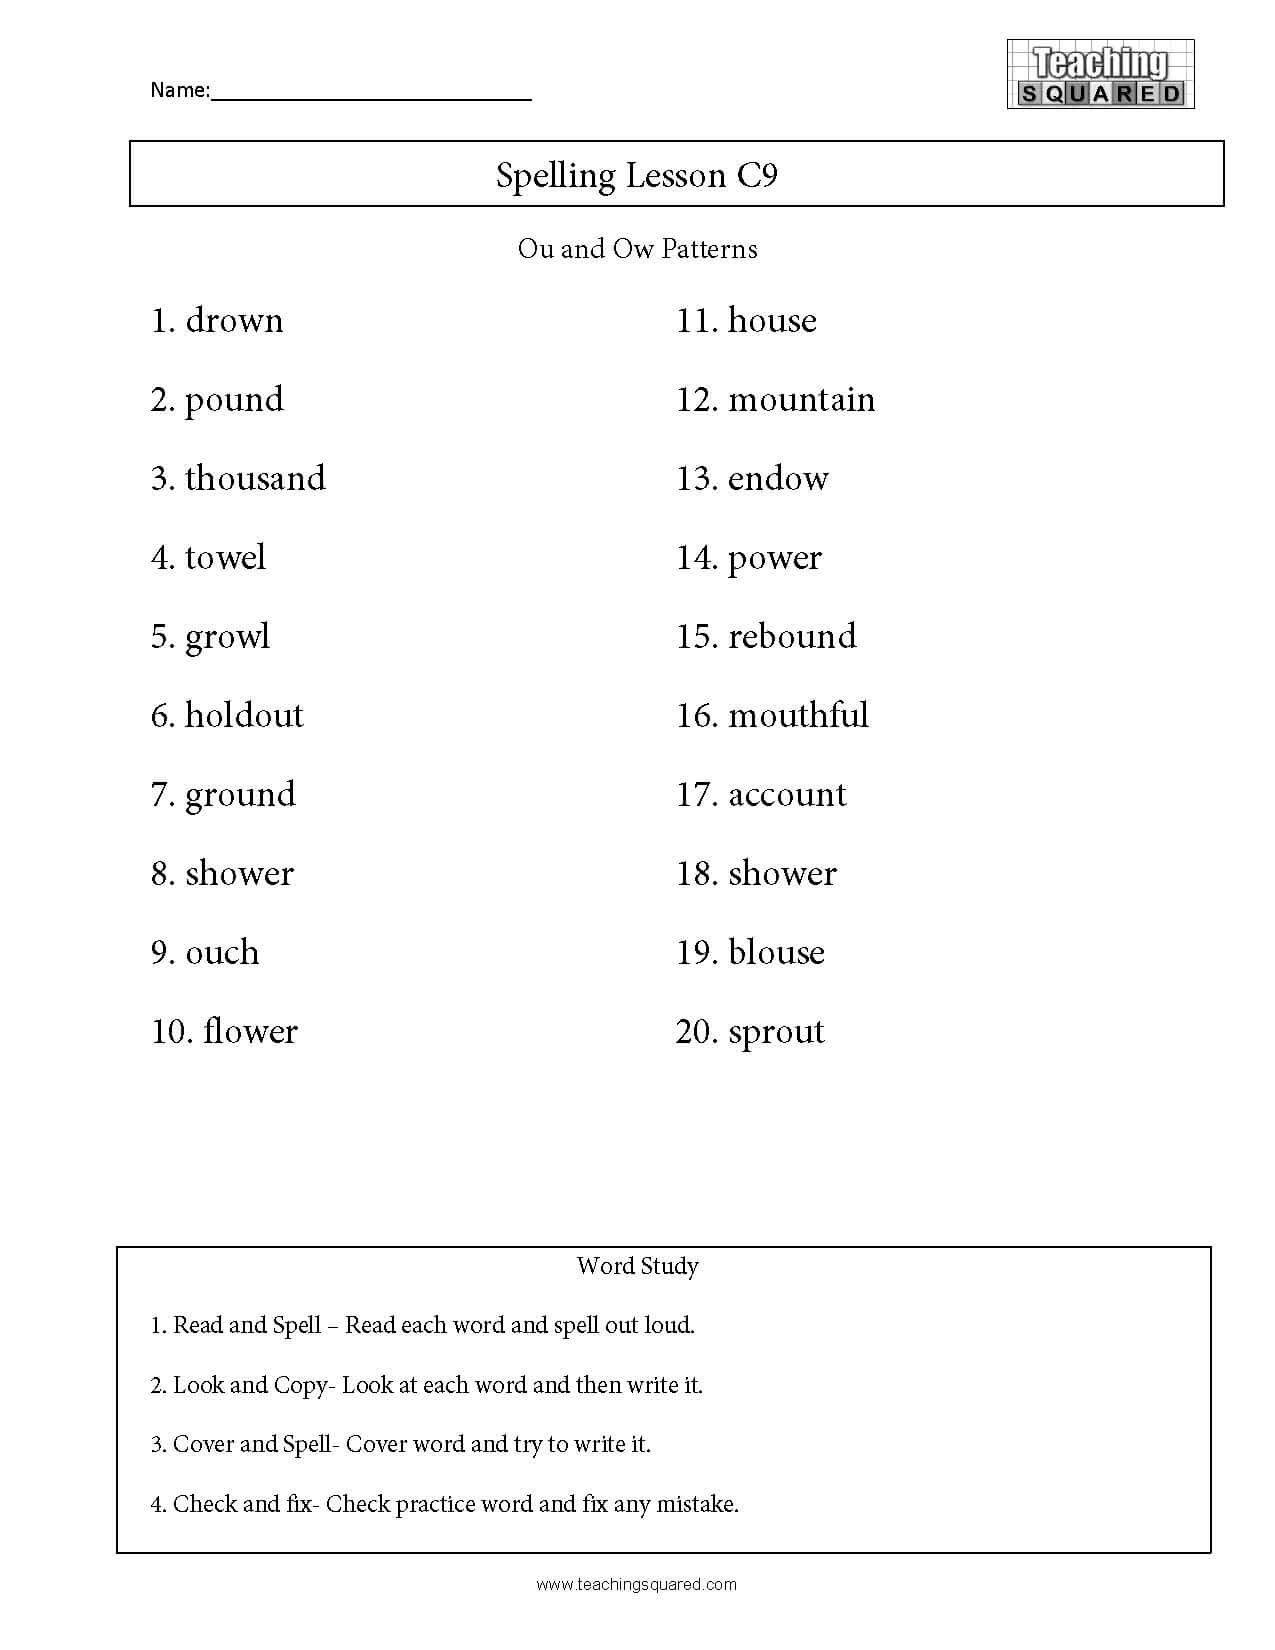 Ou Ow Worksheets 2nd Grade Spelling Lesson C9 Ou and Ow Patterns Teaching Squared